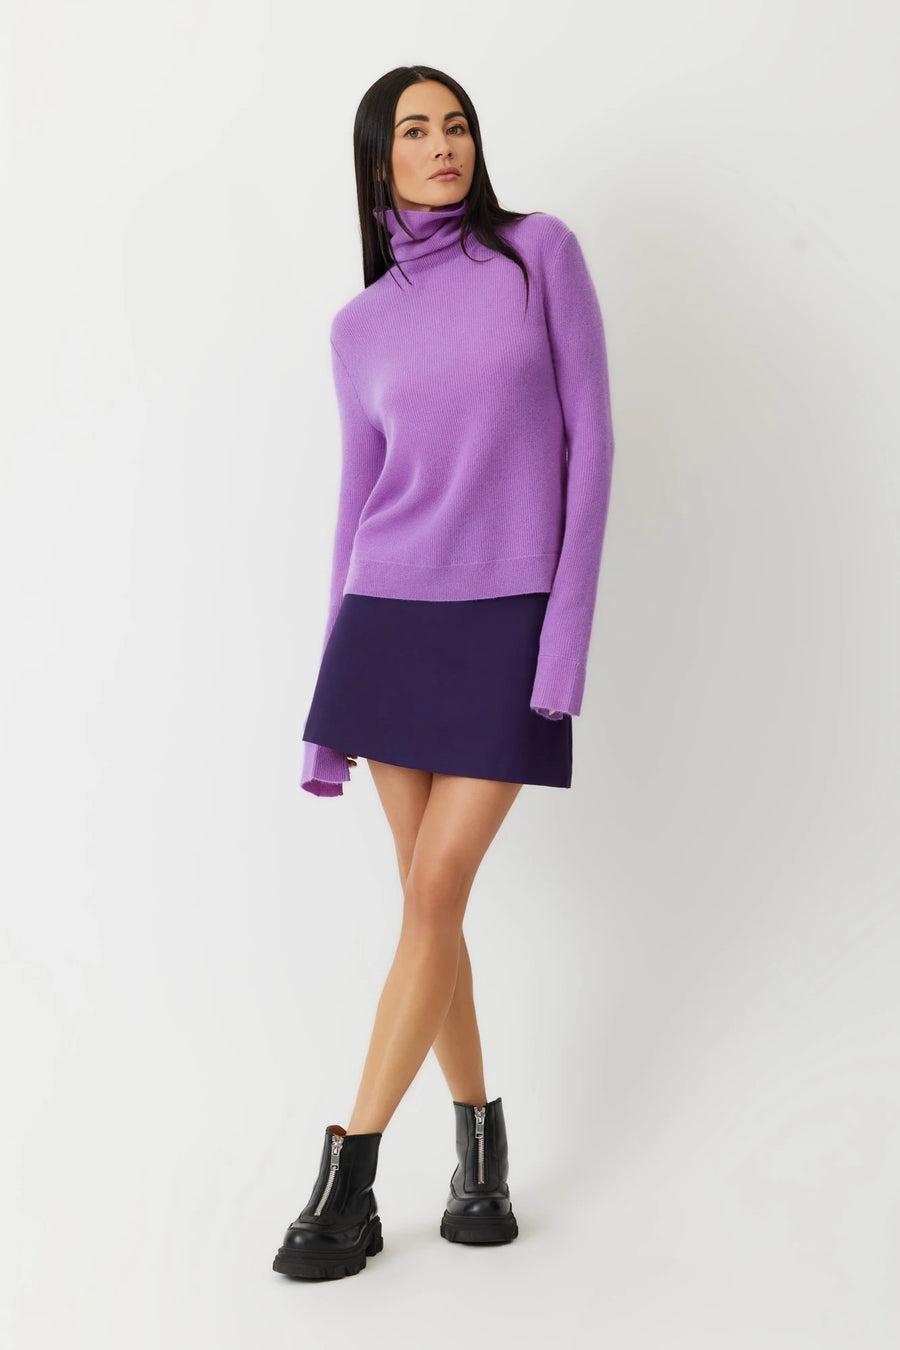 The Pria mini skirt in grape by Greyven